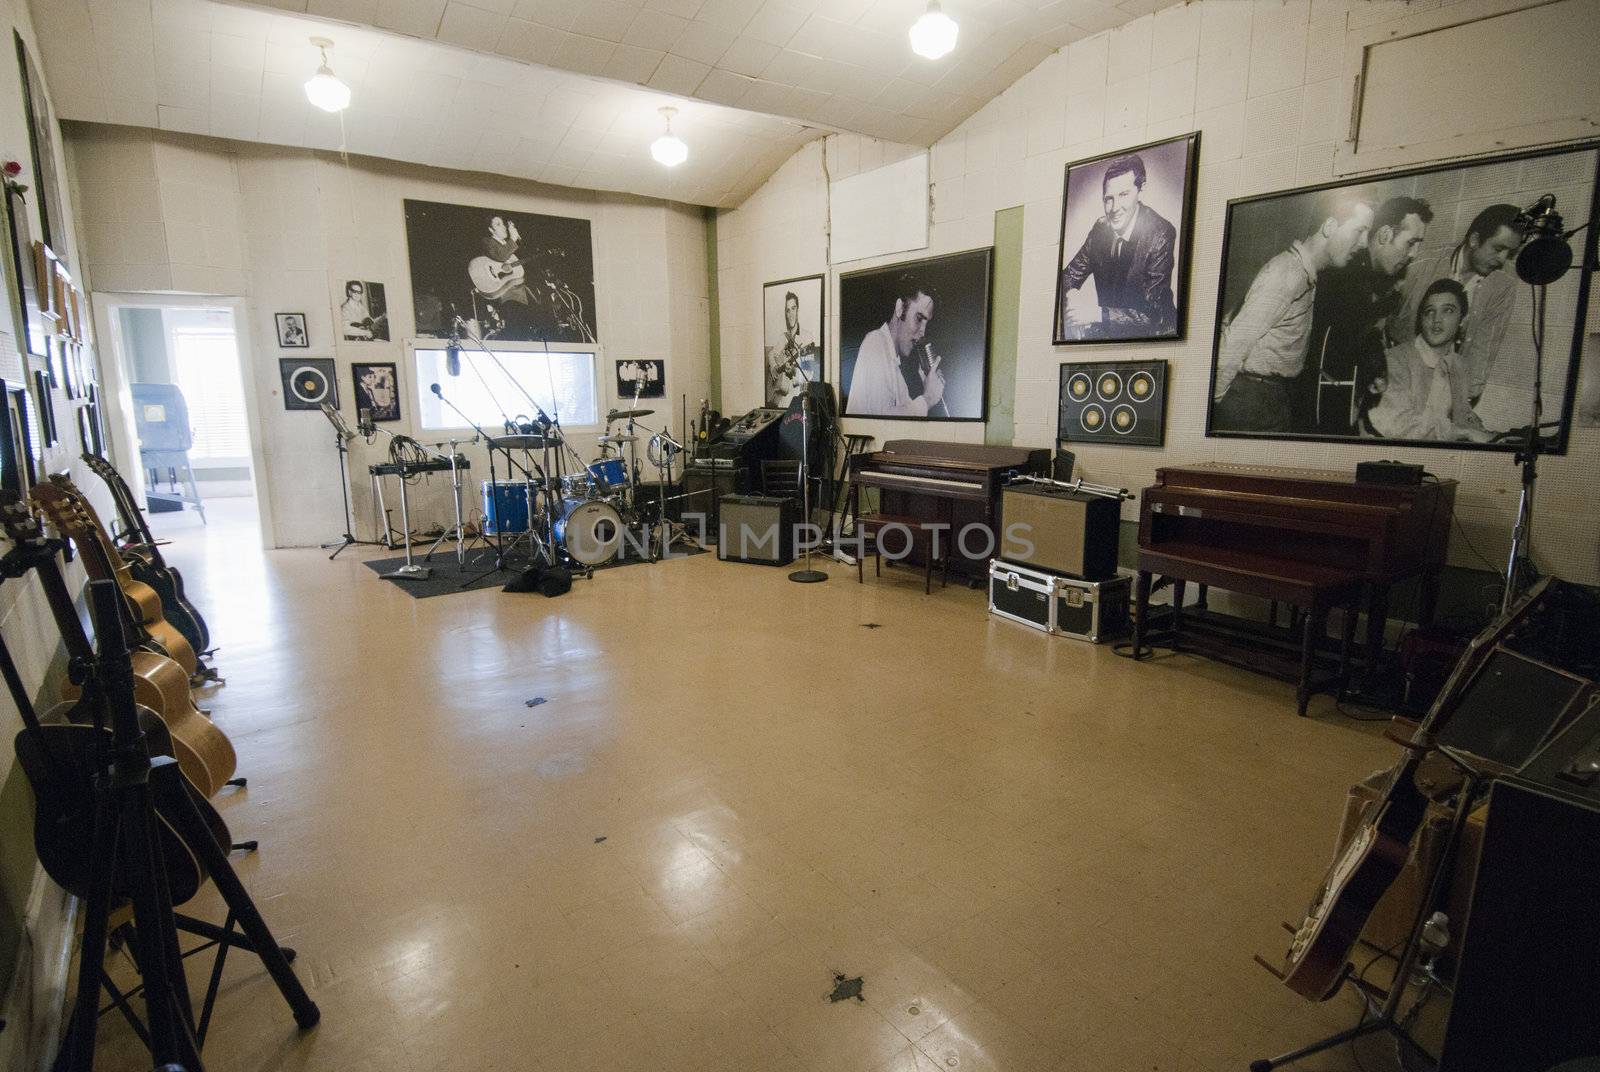 Sun Studio in Memphis, September 30th 2010. Famous artists like Johnny Cash, Elvis Presley, Carl Perkins, Roy Orbison, Charlie Feathers, Ray Harris, Warren Smith, Charlie Rich, and Jerry Lee Lewis all recorded their first songs here.